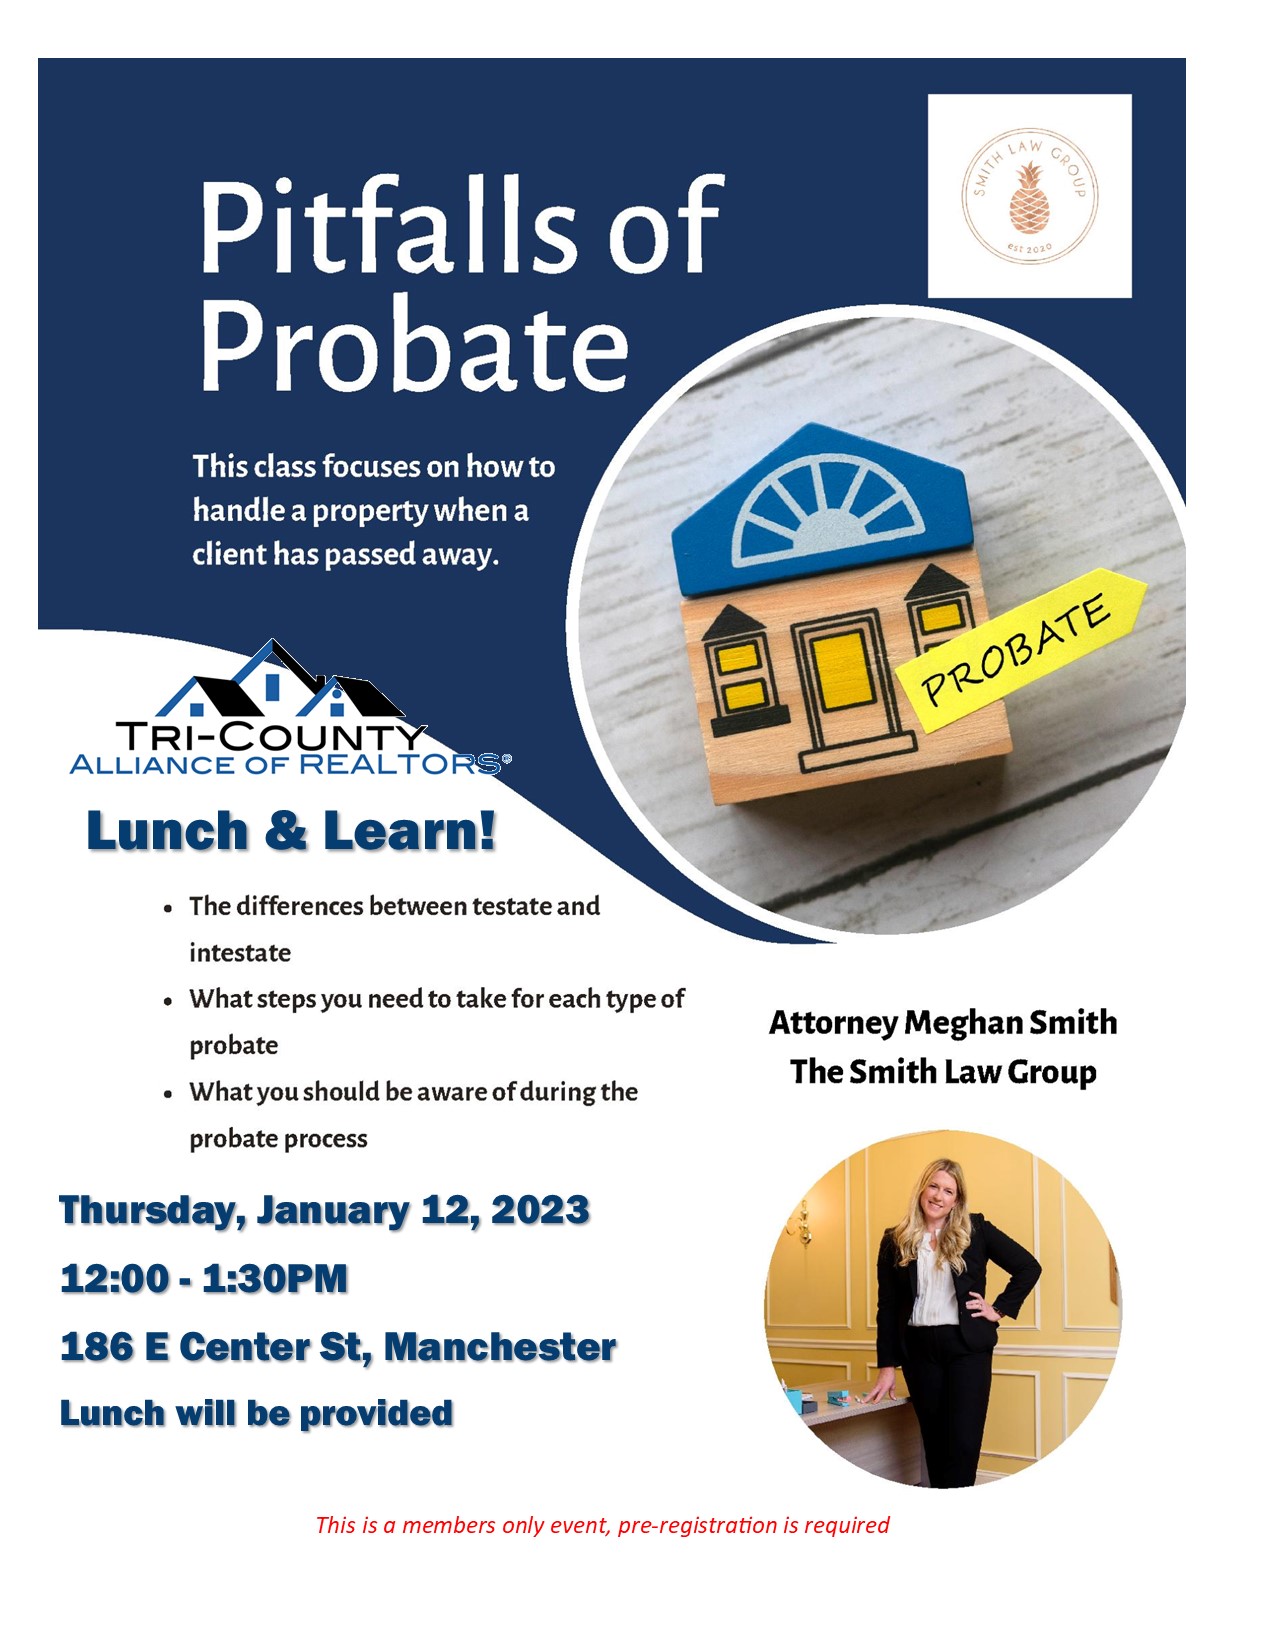 Lunch & Learn 1/12/23 sponsored by Smith Law Group: Pitfalls of Probate